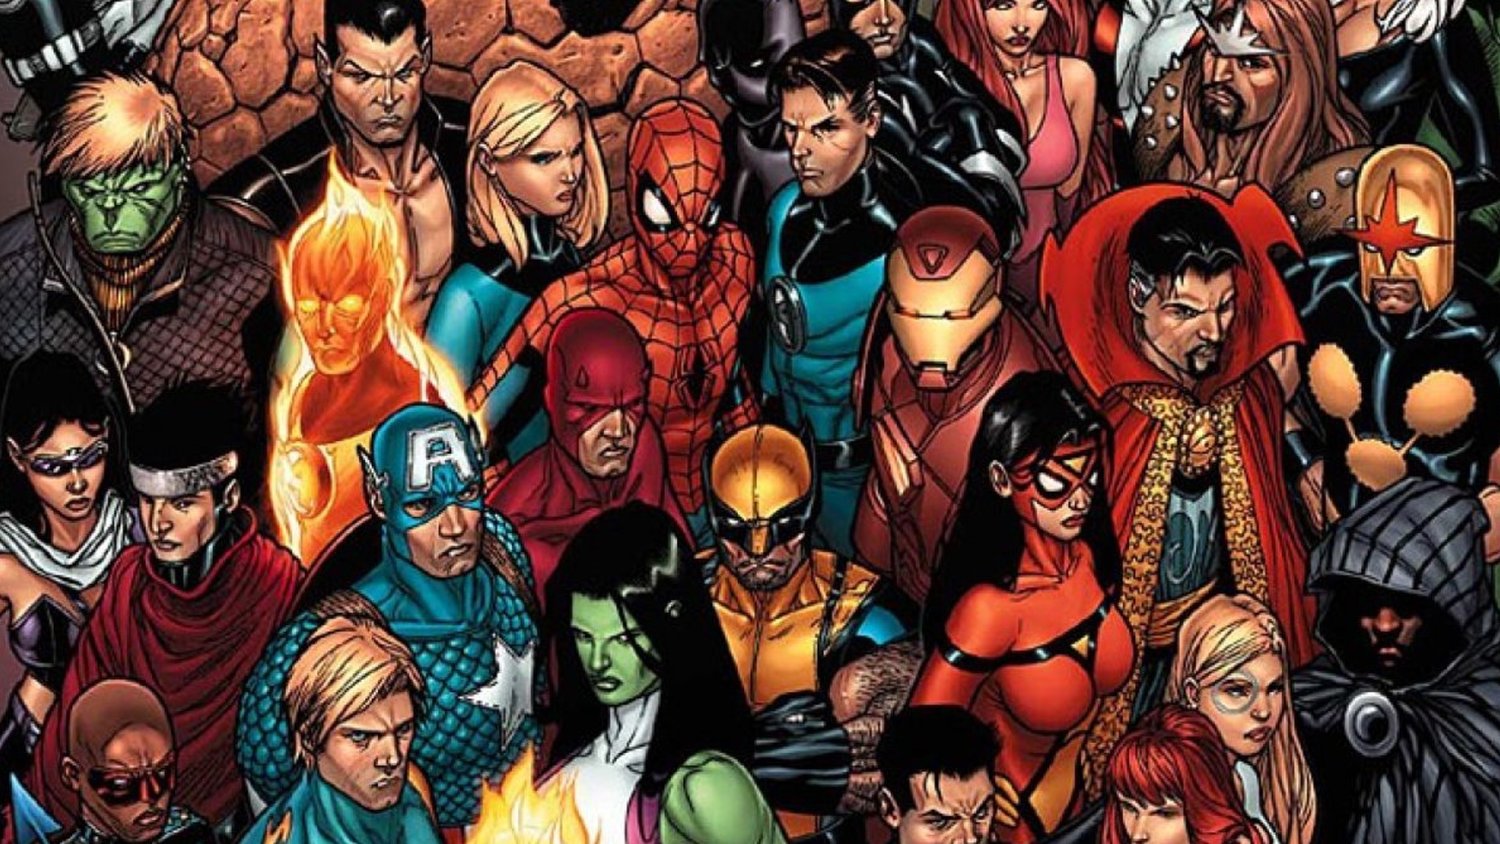 Avengers Vs X-men its coming graphic novel review and analysis